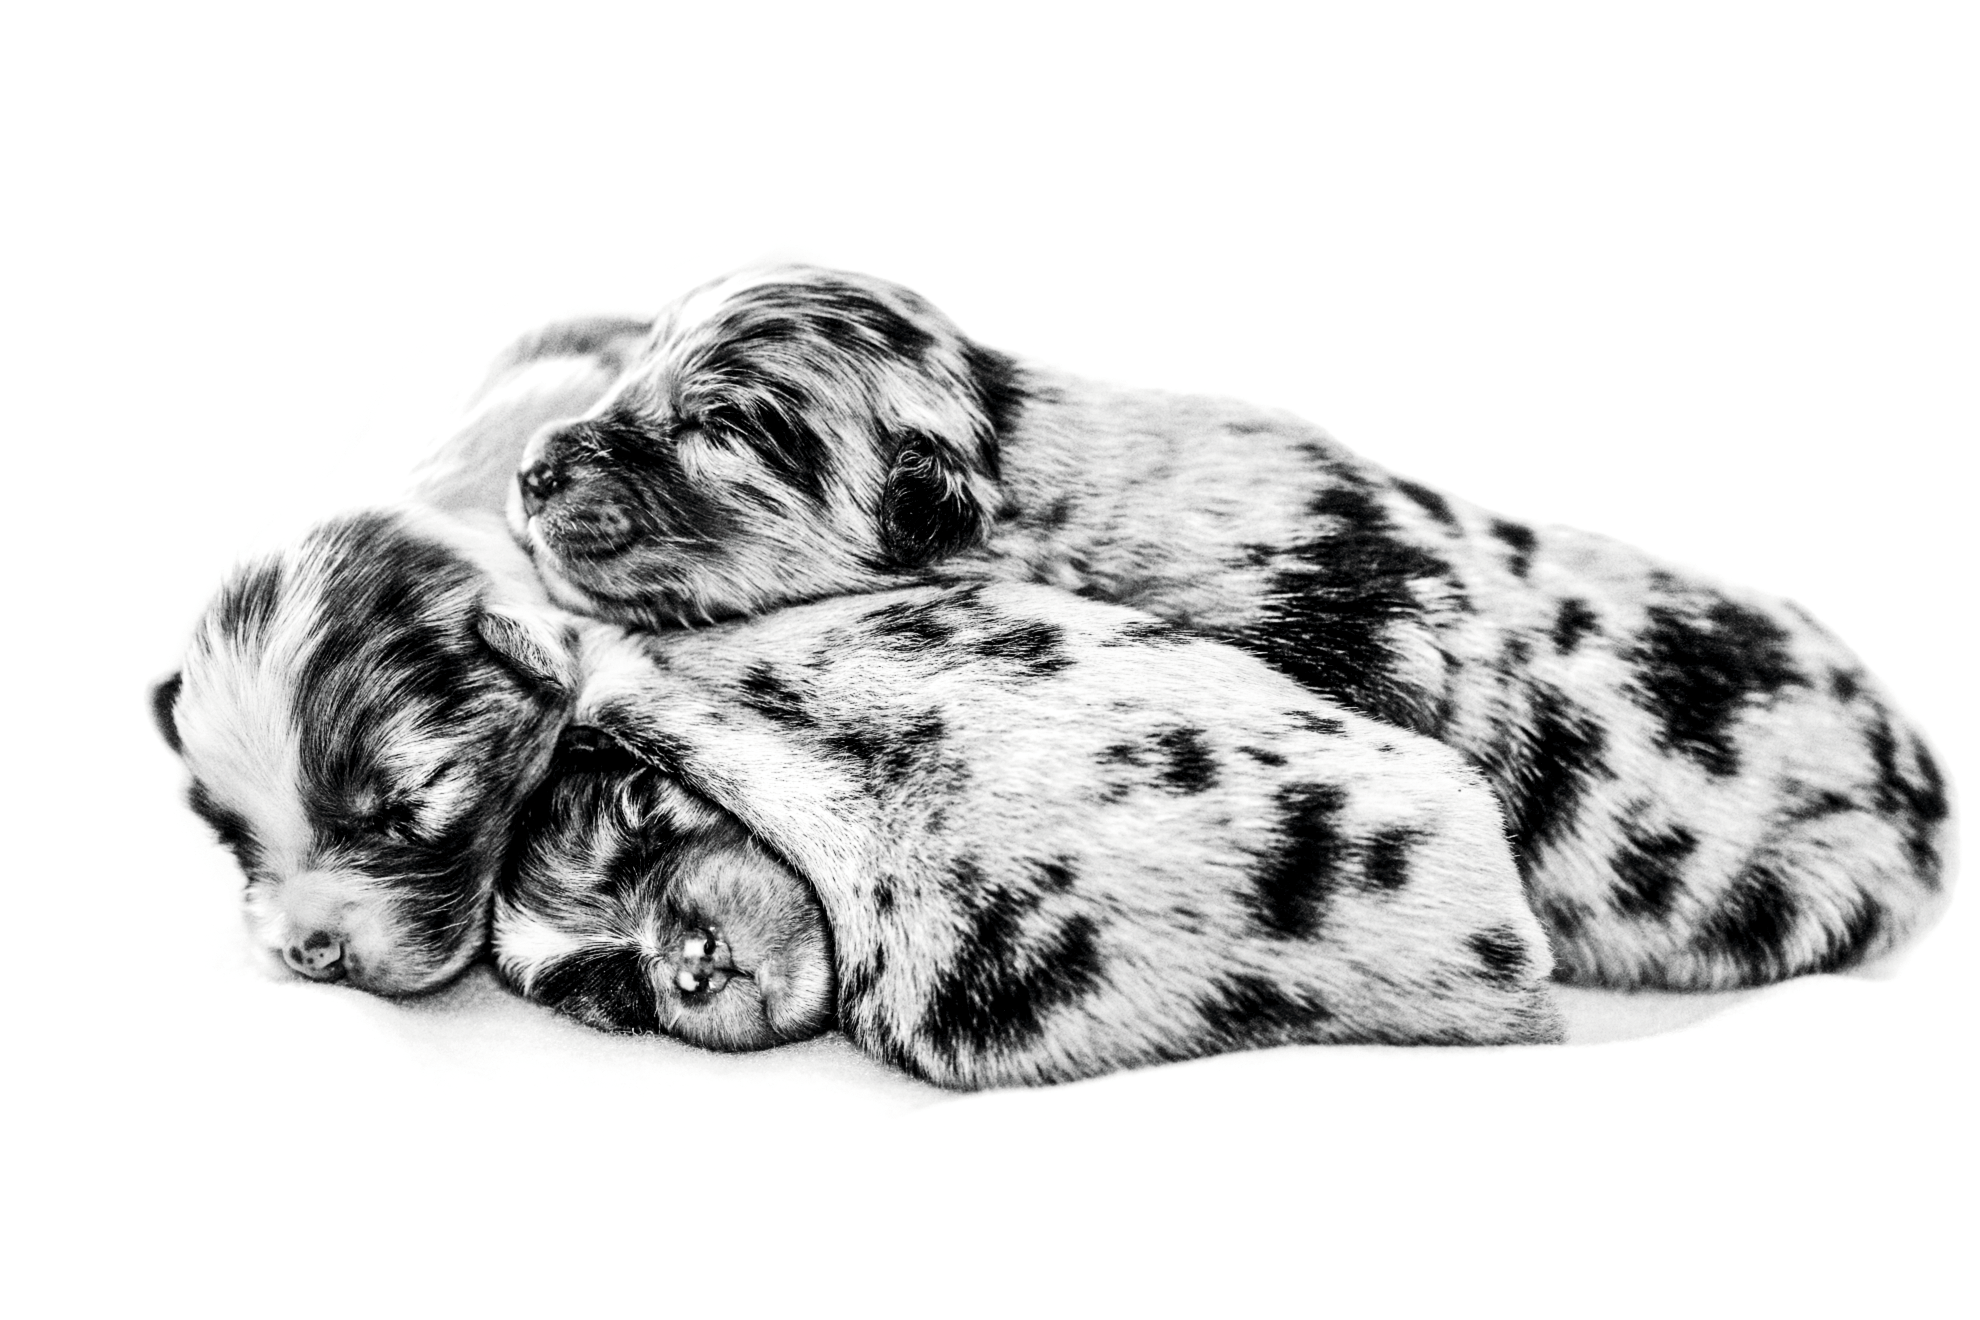 Australian Shepherd puppies lying down in black and white on a white background